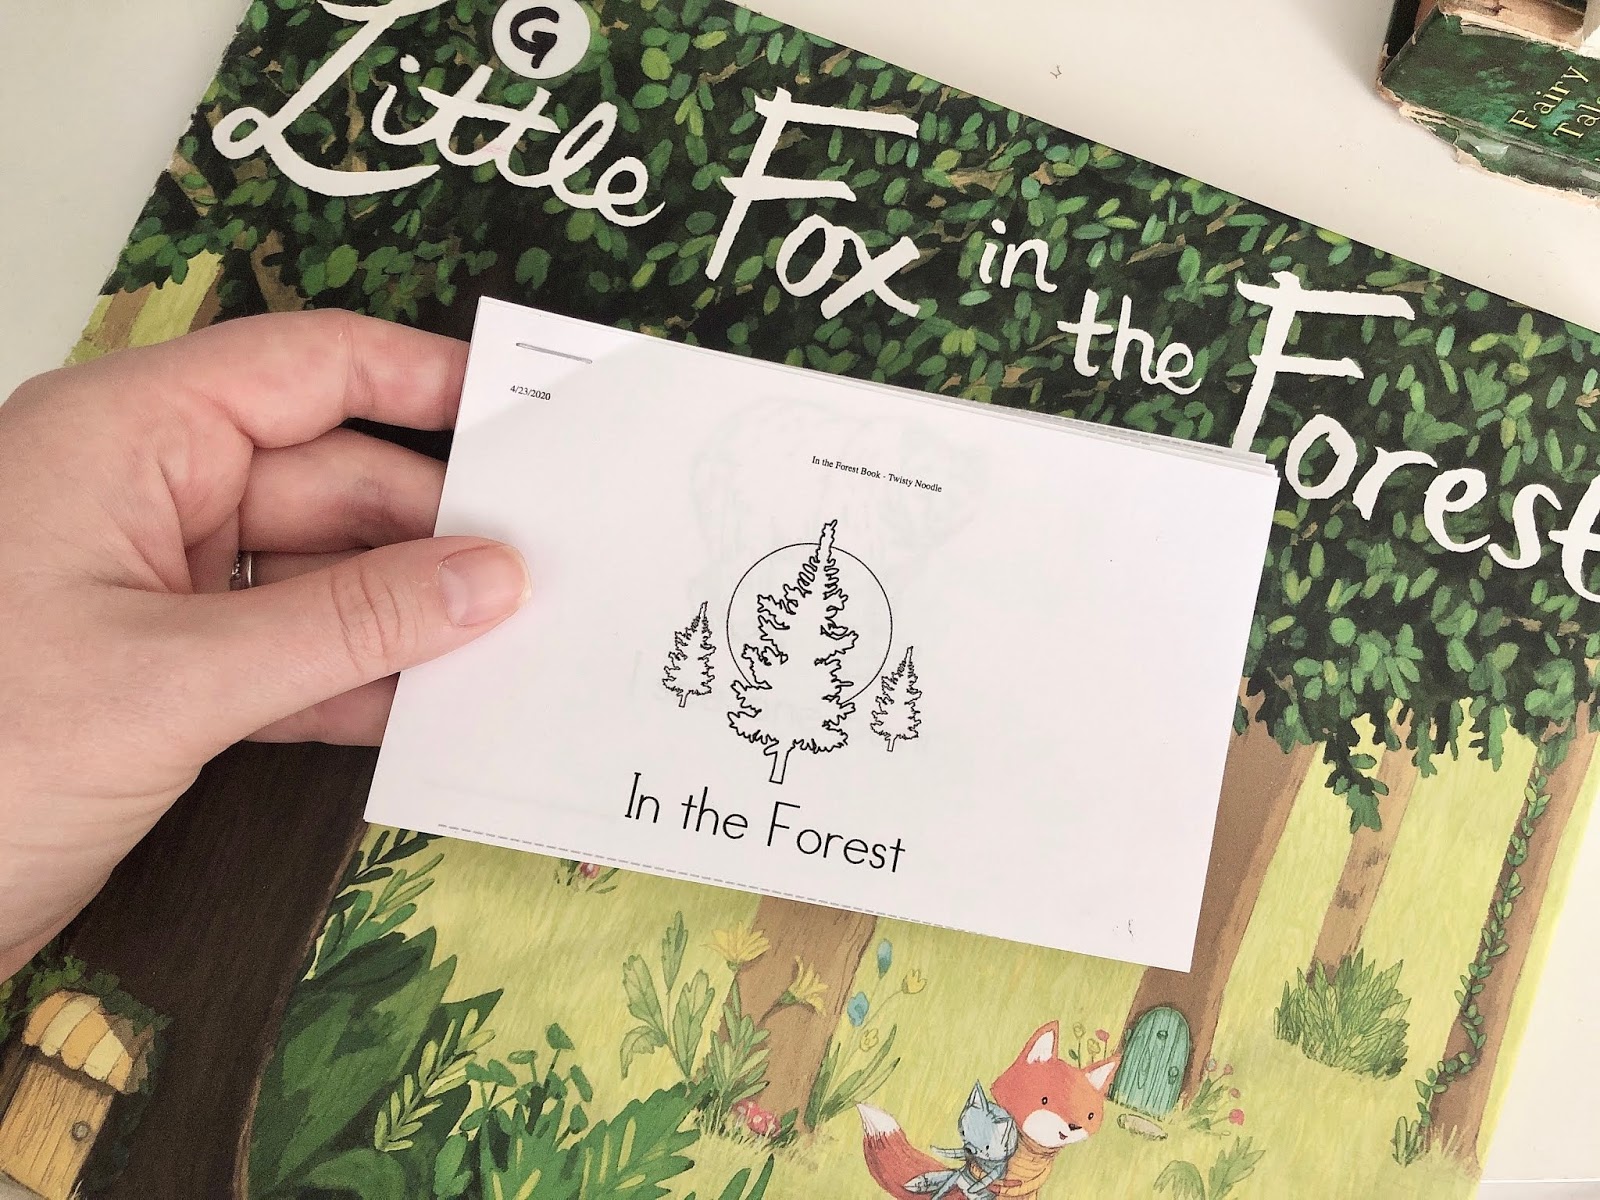 Check out these amazing ELA read alouds and activities that embrace the forest habitat + inferring! See more at www.littlefoxteaching.com